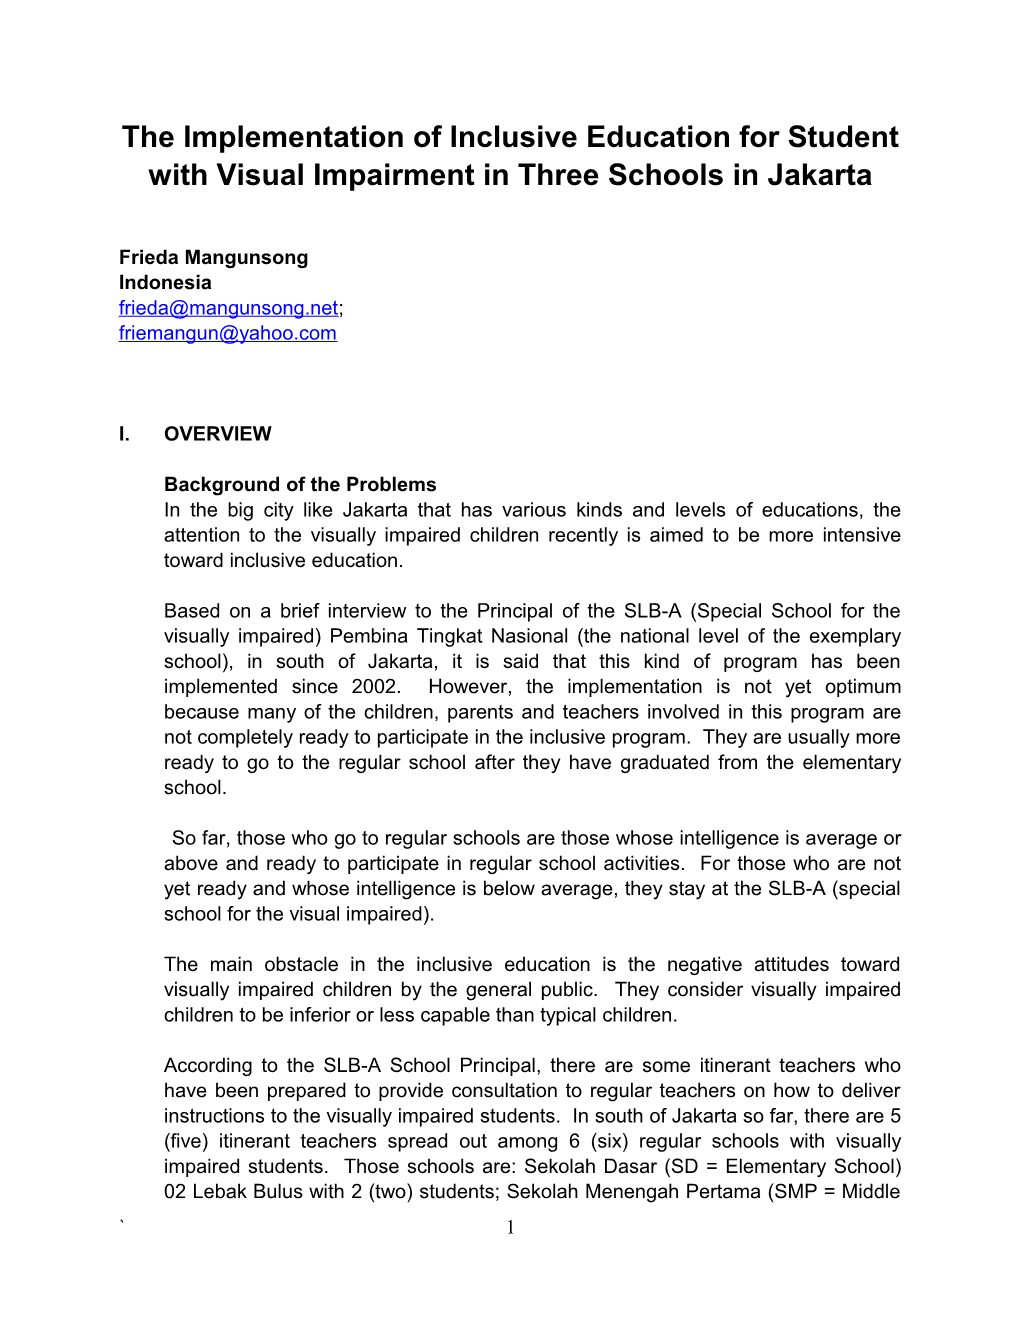 The Implementation of Inclusive Educationfor Student with Visual Impairment in Three Schools